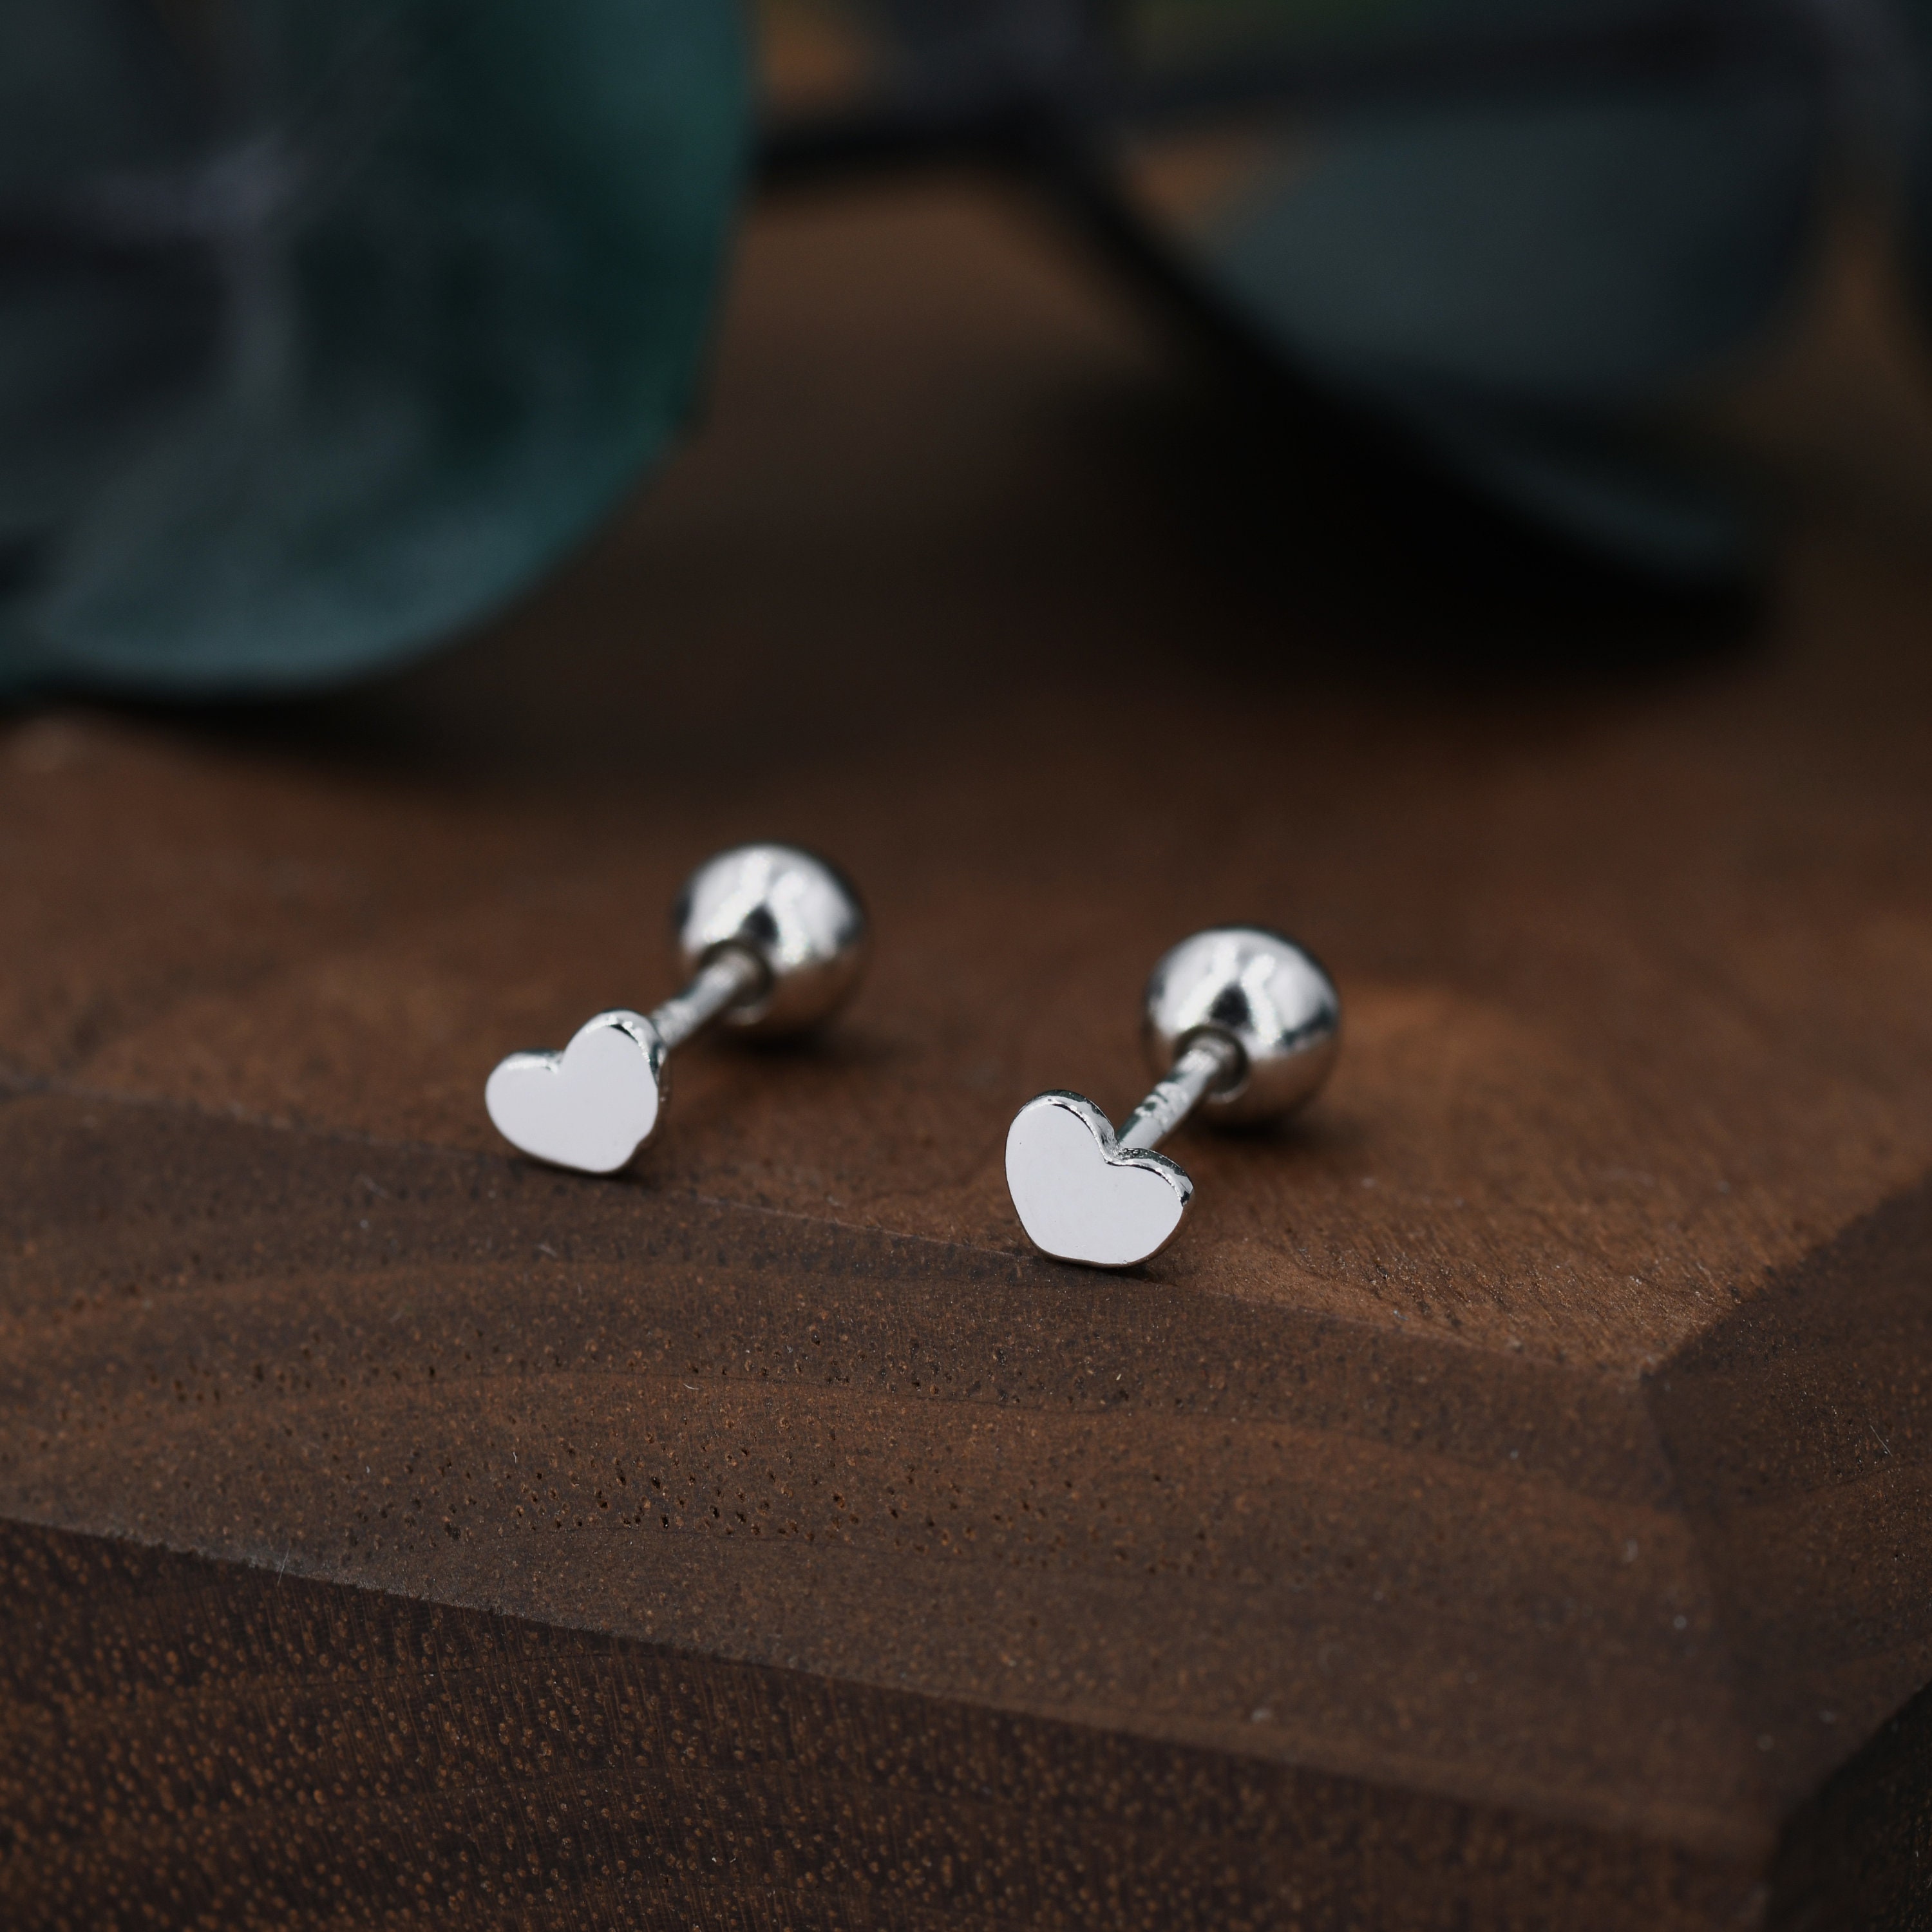 Heart Screw Back Earrings | Tiny Stacking Earring Studs | Hypo-Allergenic & Nickel-Free Jewelry Gold